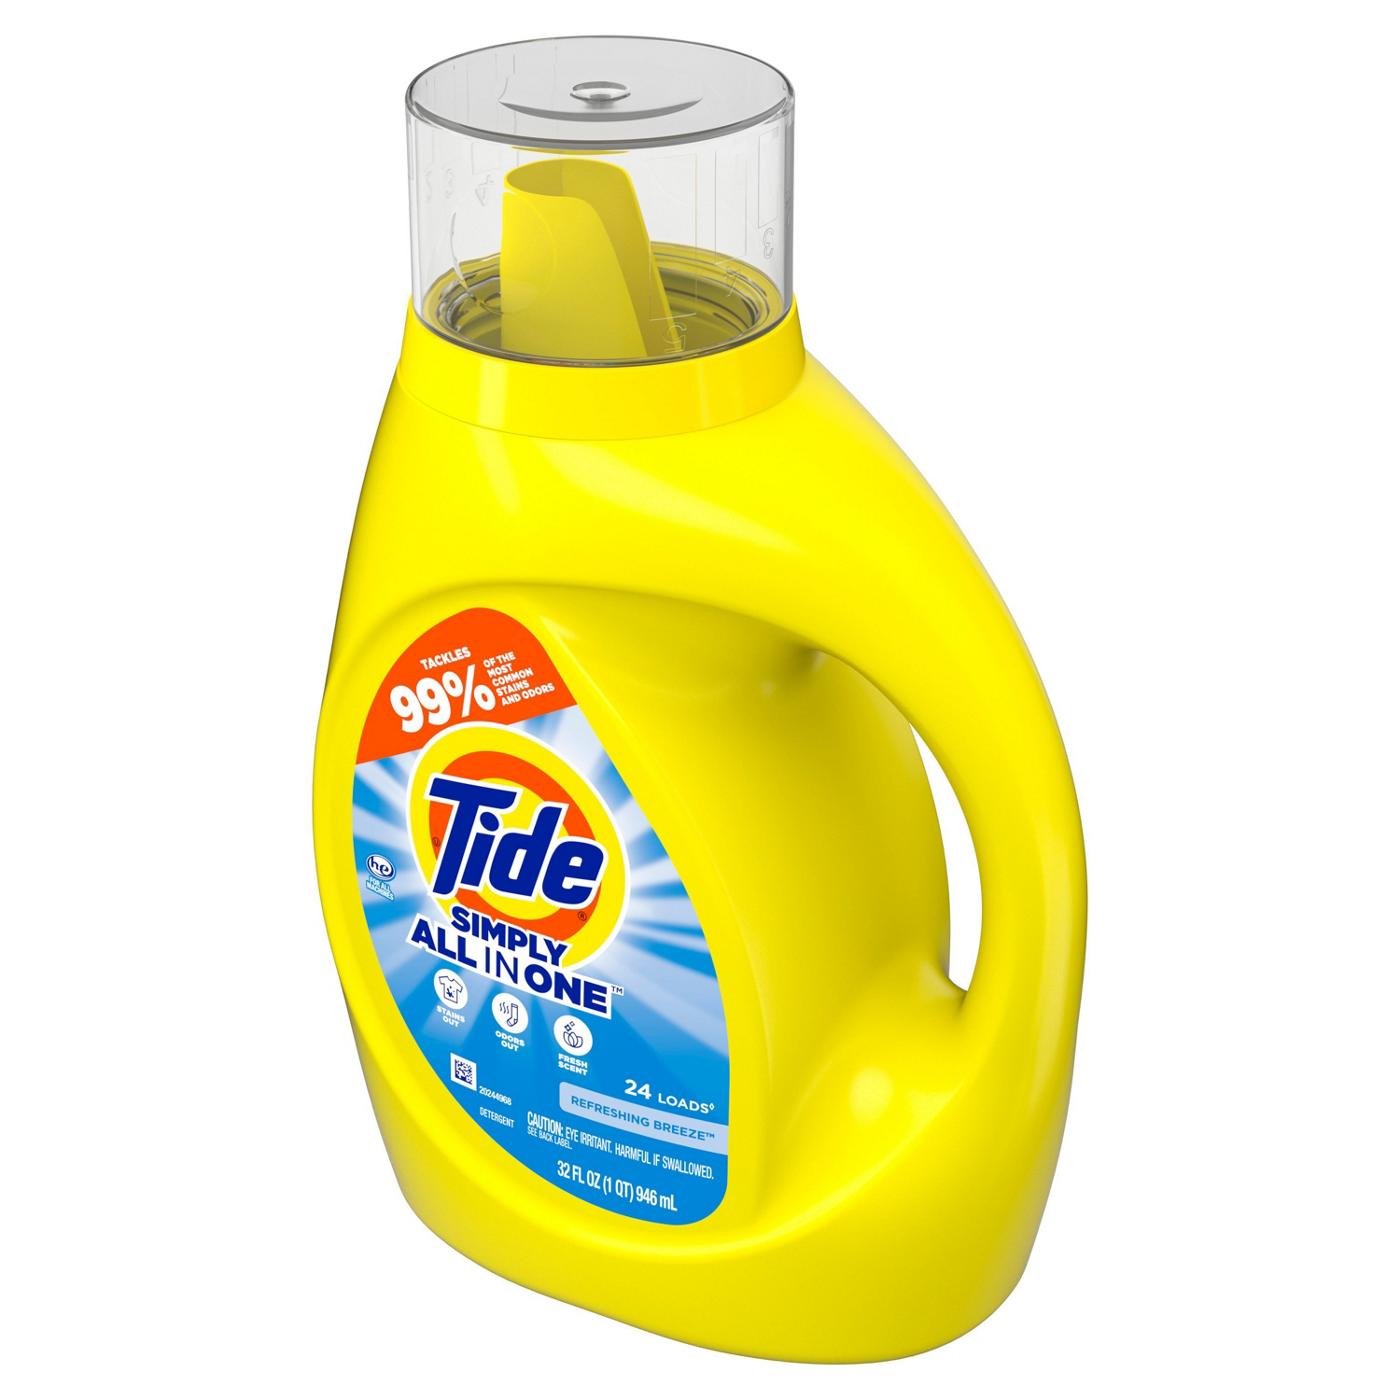 Tide Simply Clean & Fresh HE Liquid Laundry Detergent, 24 Loads - Refreshing Breeze; image 11 of 16